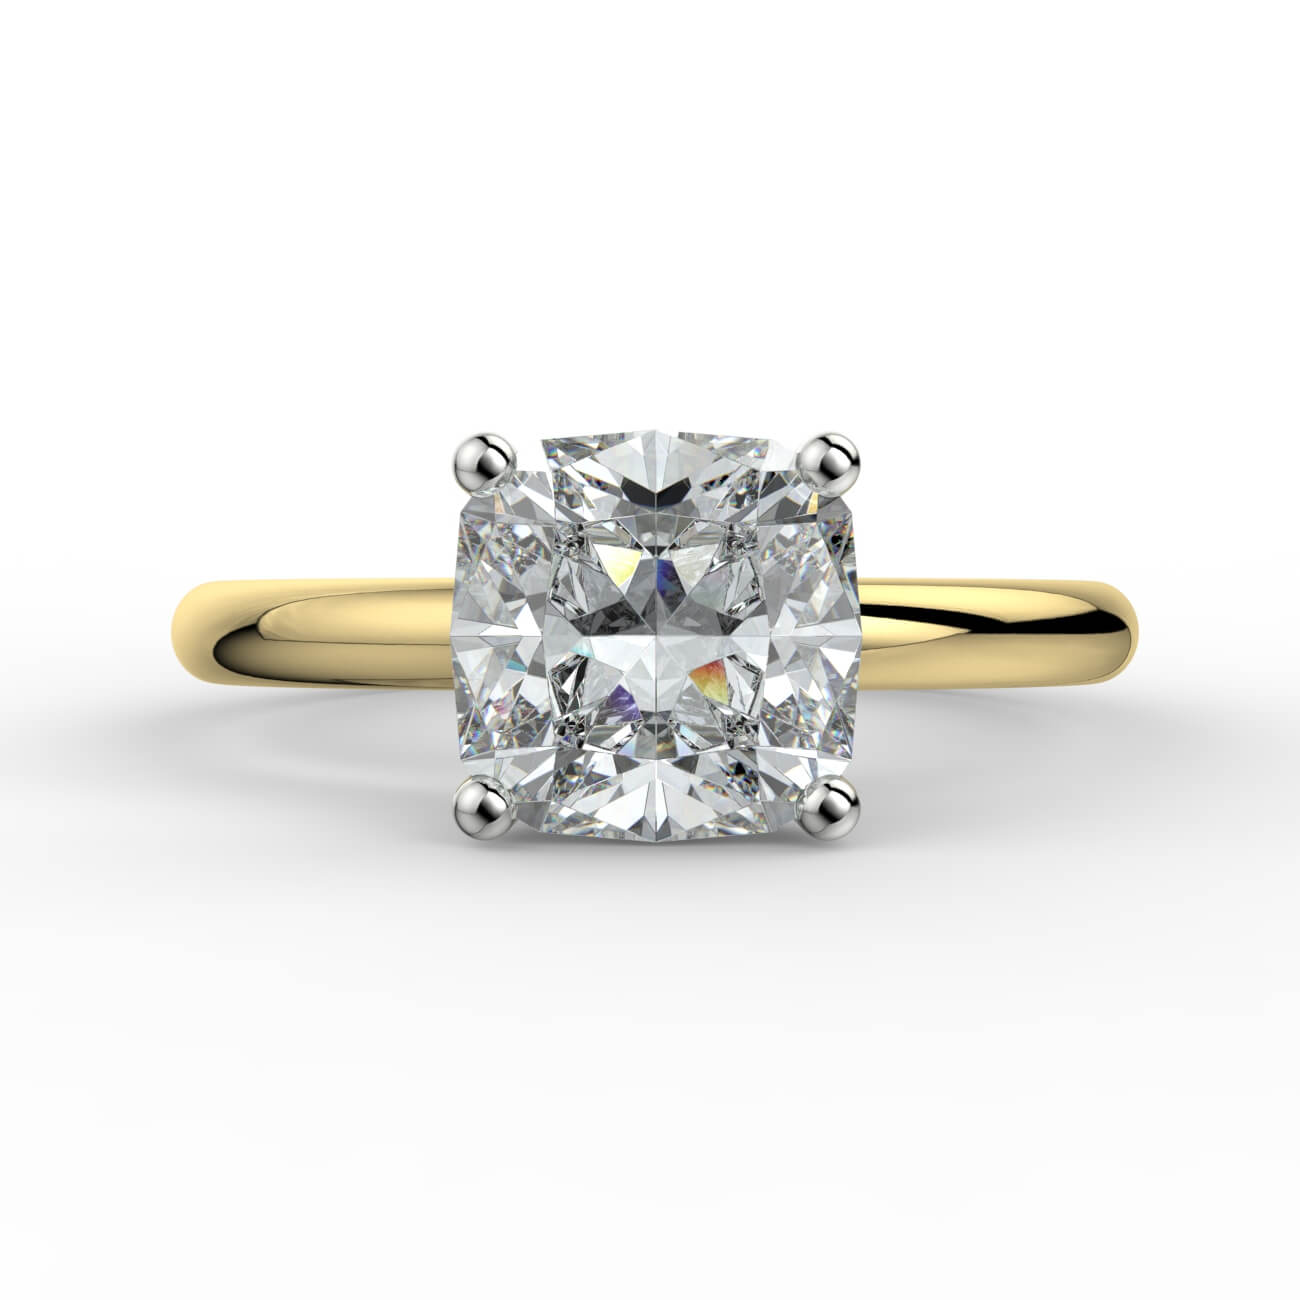 Solitaire cushion cut diamond engagement ring in white and yellow gold – Australian Diamond Network